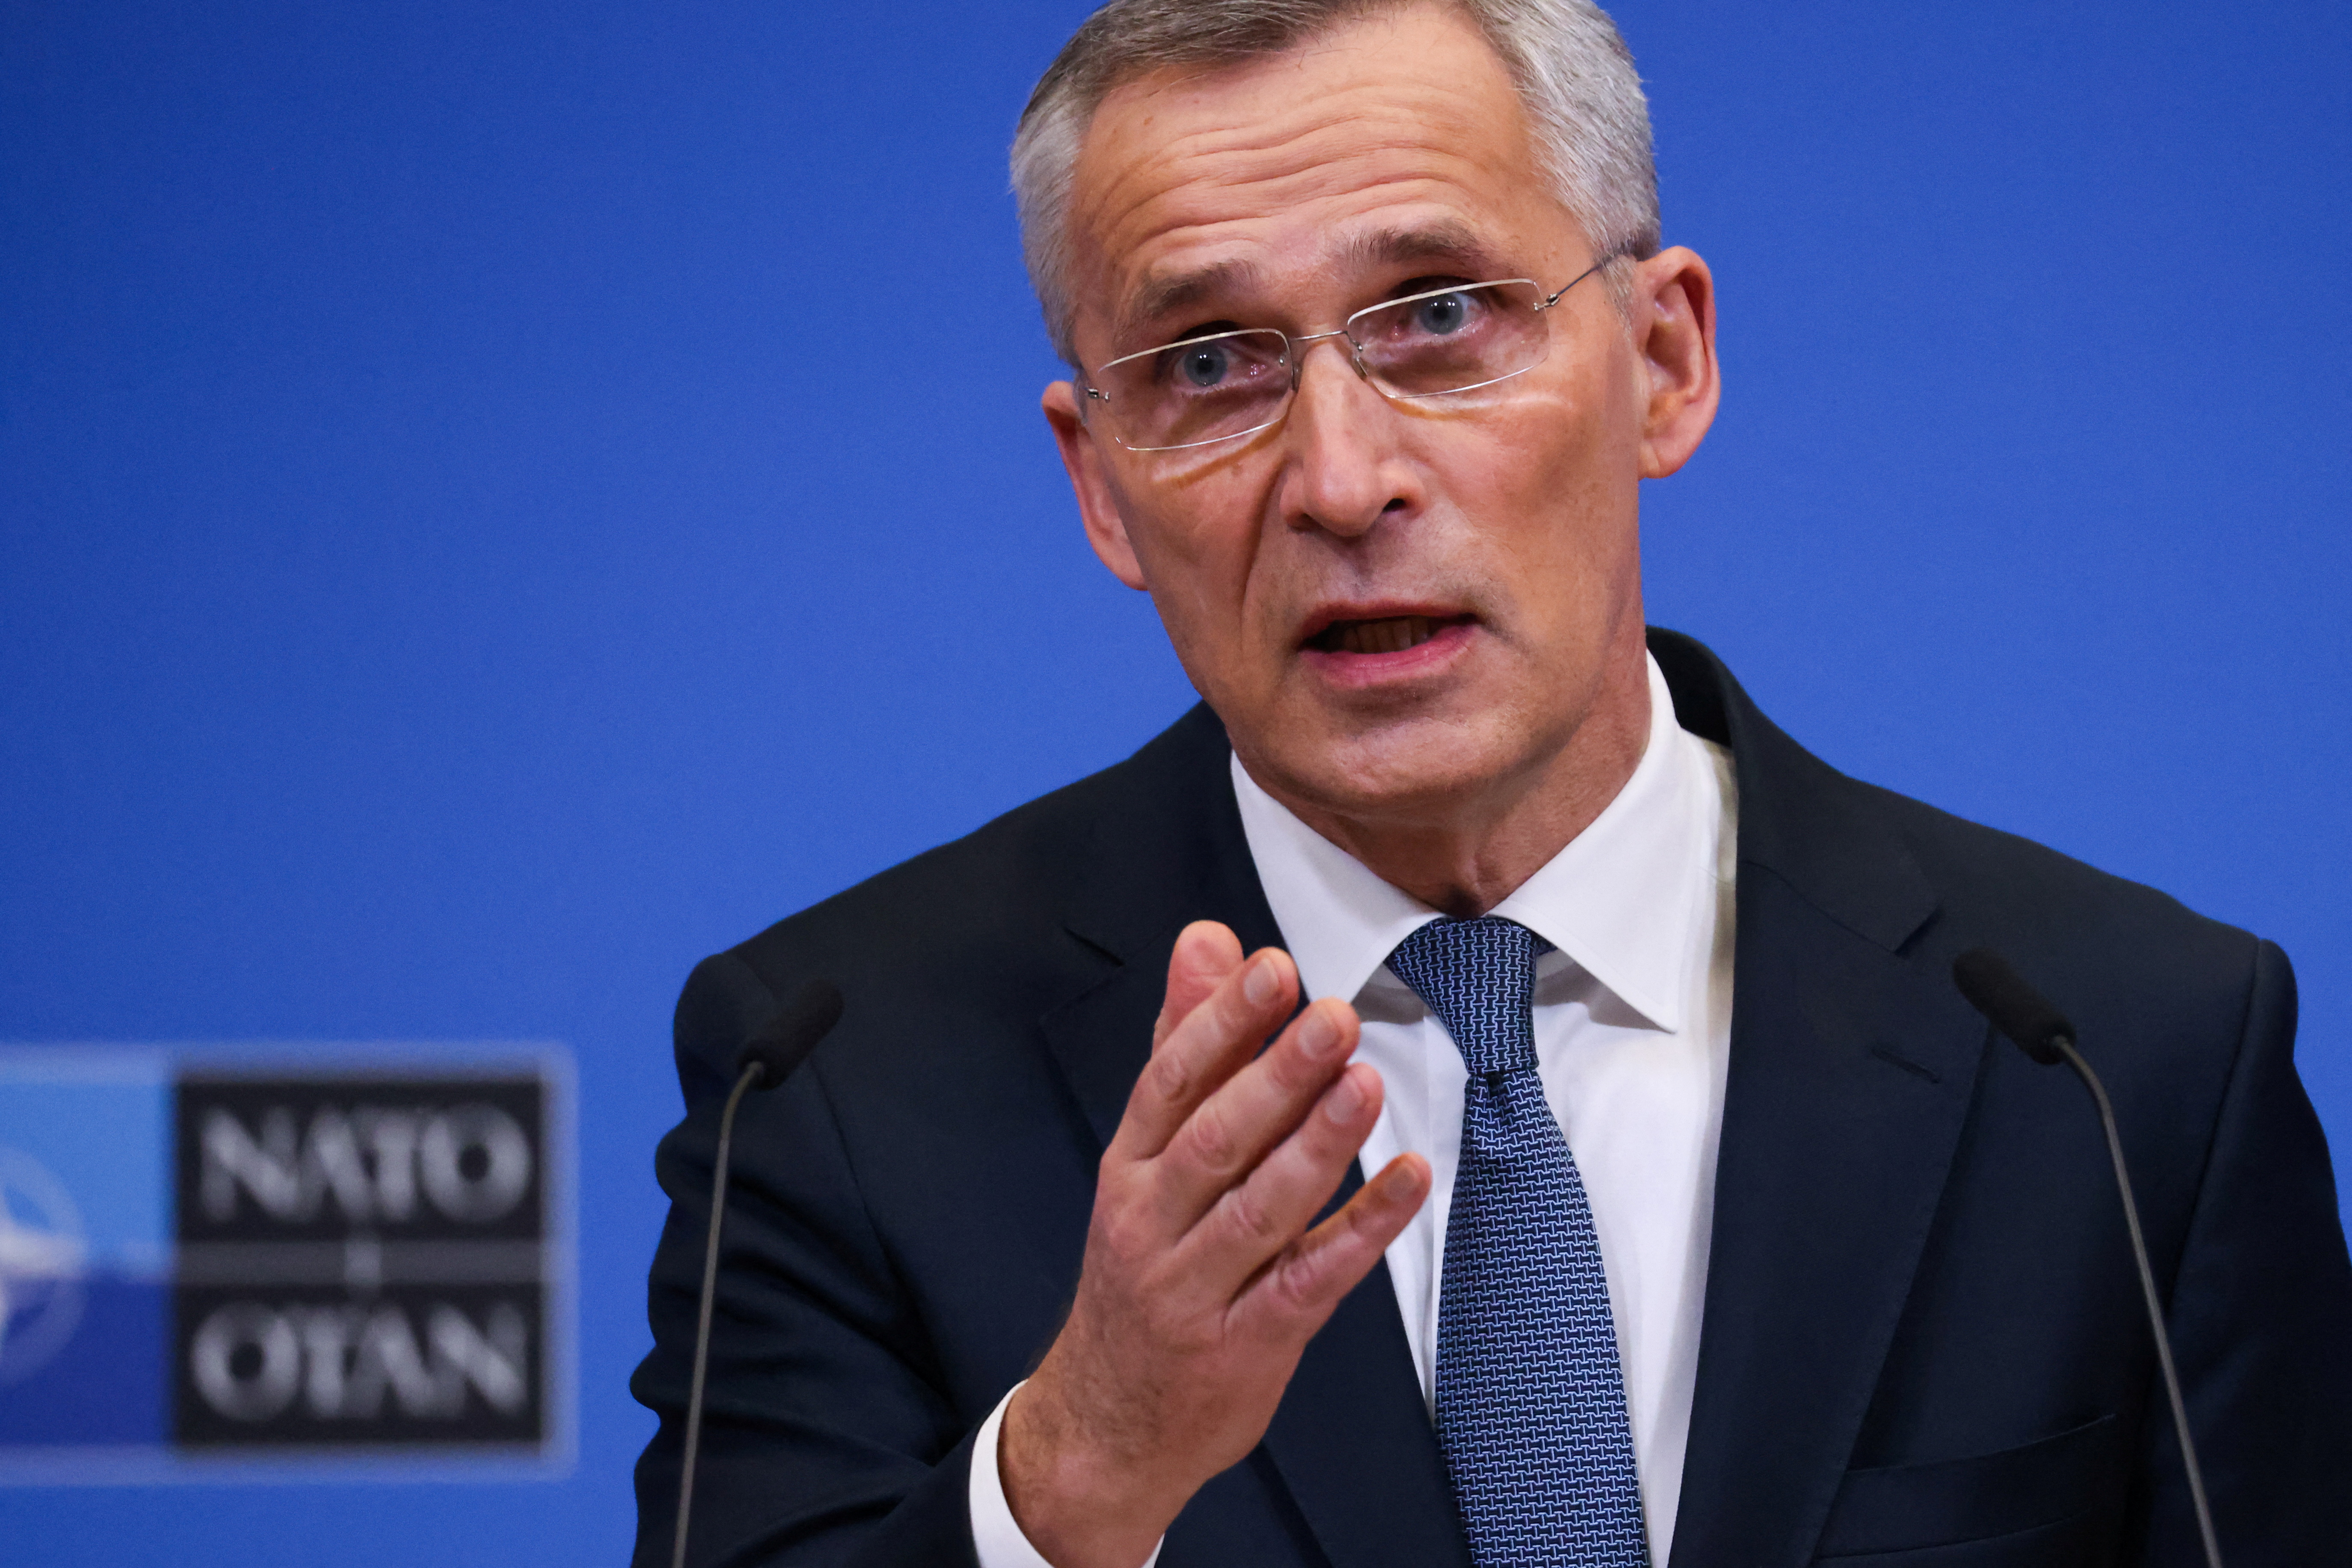 NATO Secretary-General Jens Stoltenberg holds a news conference, in Brussels